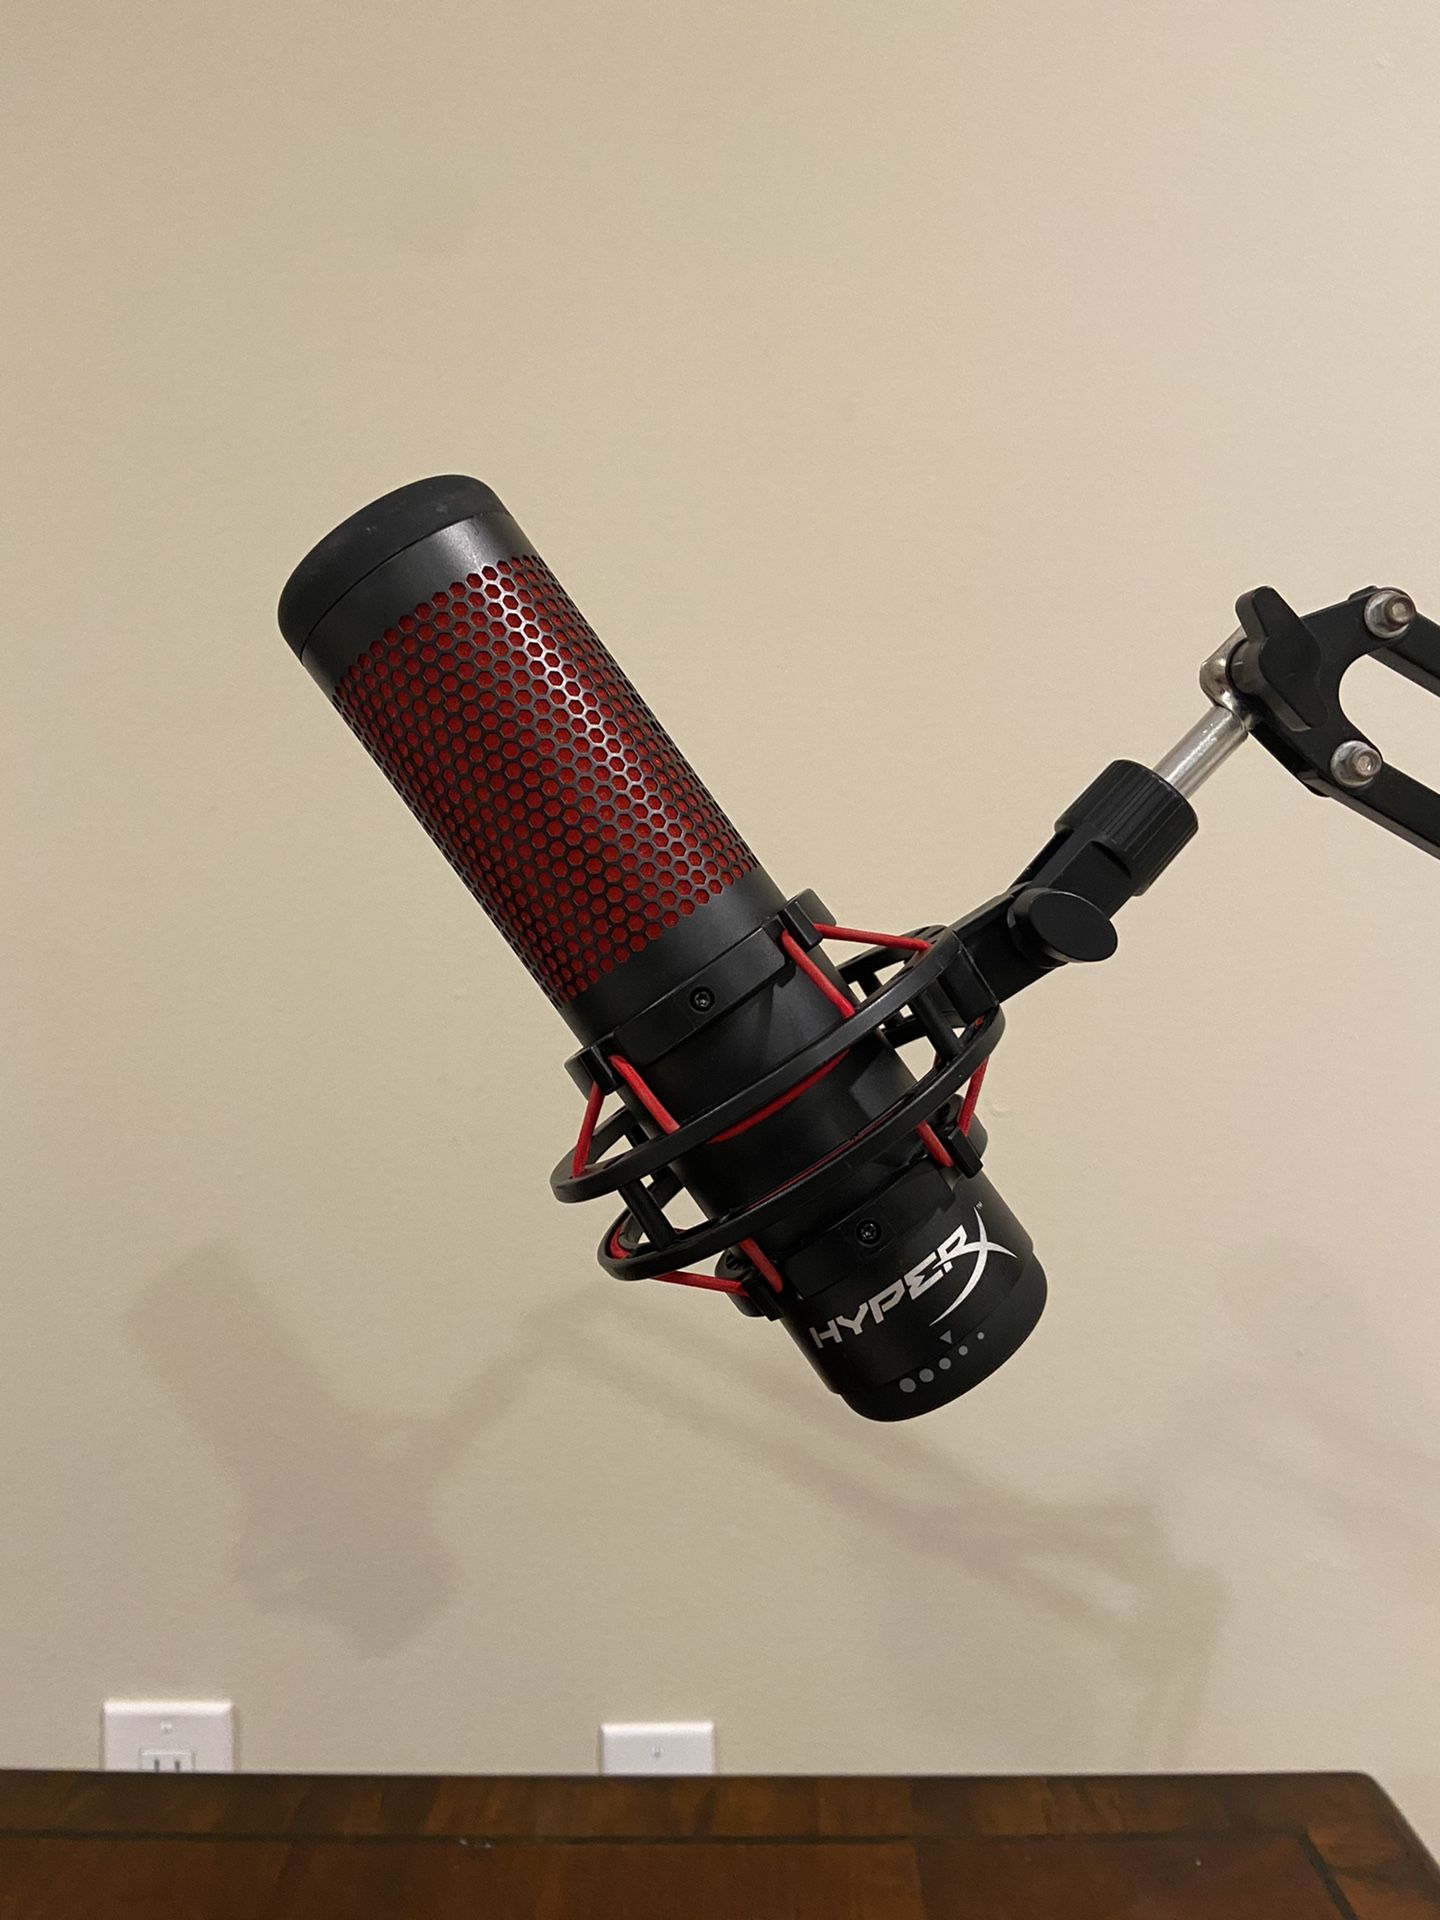 HyperX Quadcast USB Condensor Microphone for Gaming and Streaming, with Arm